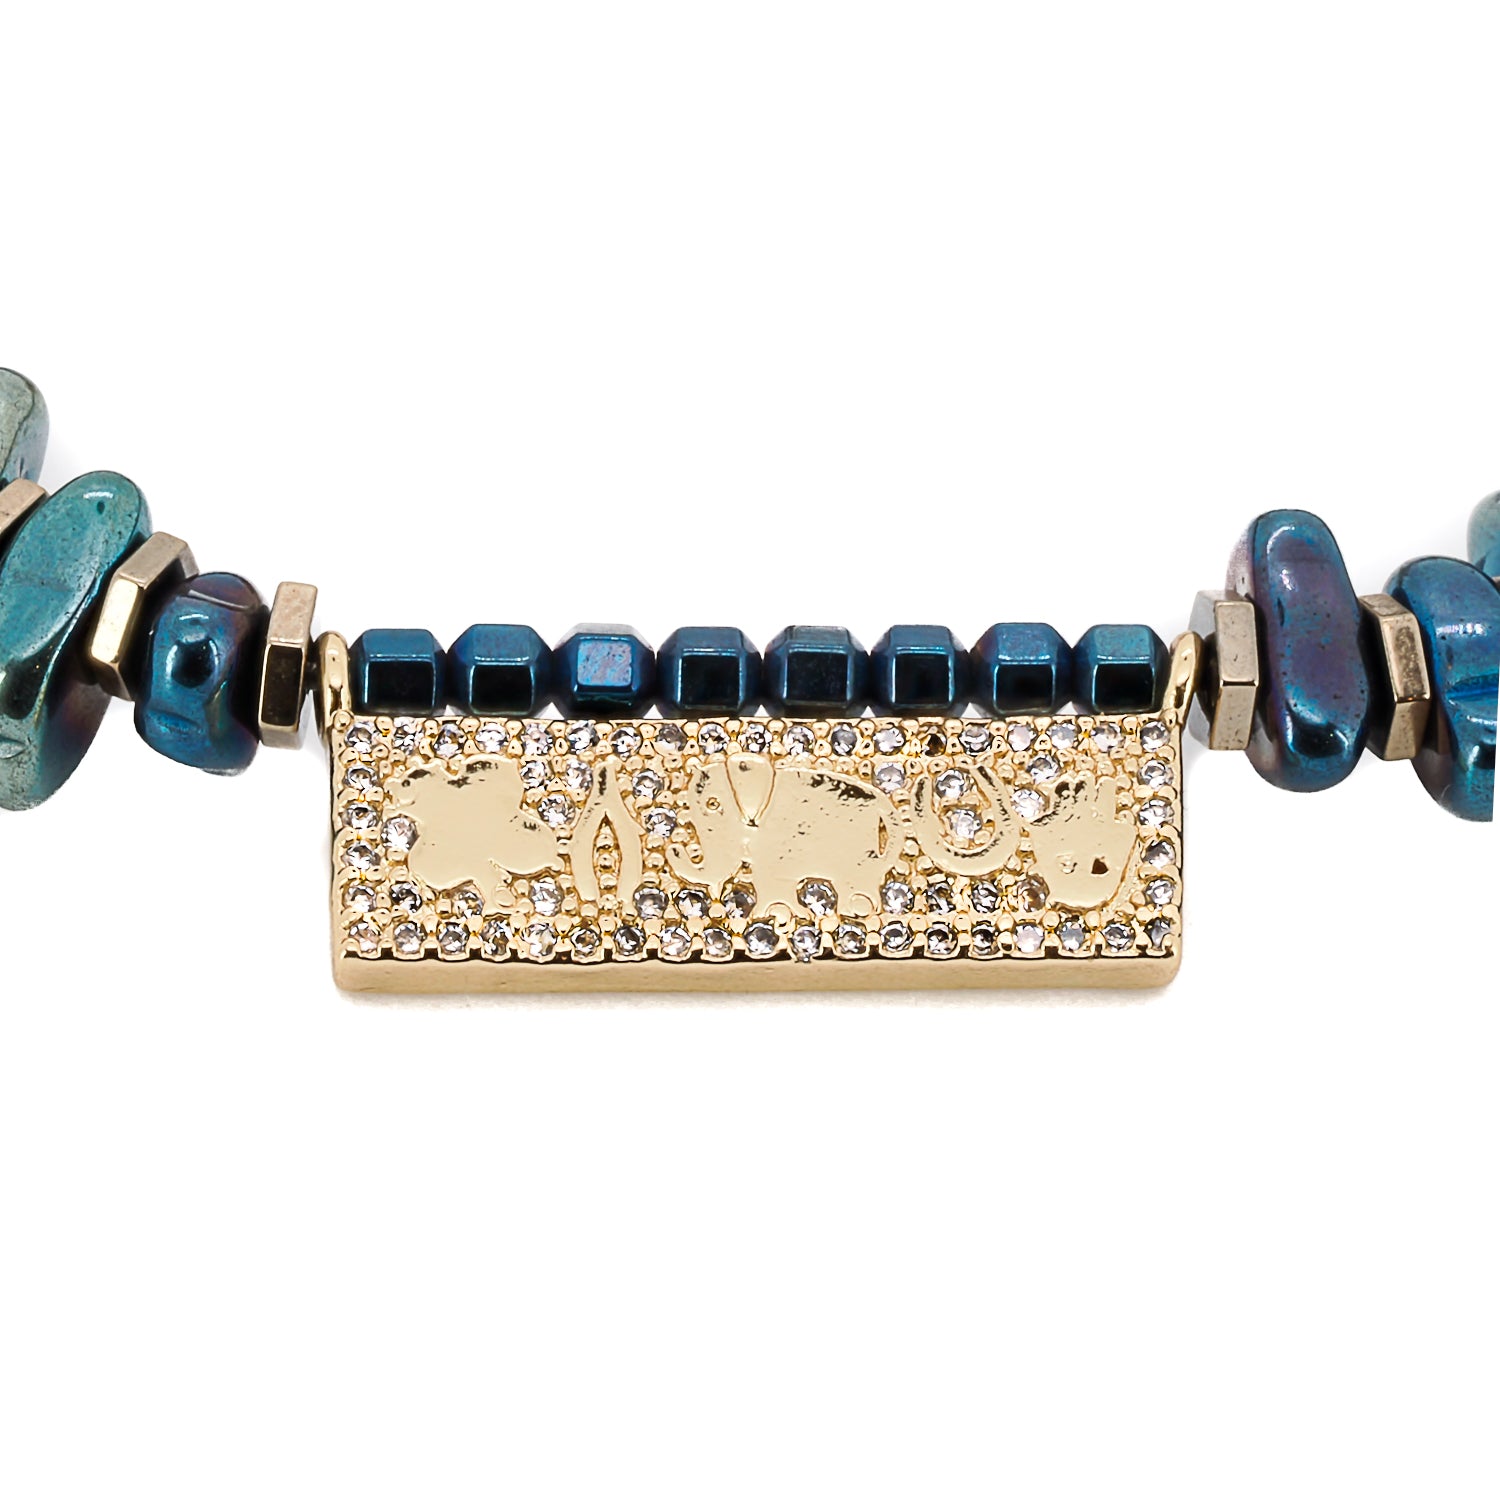 Find protection and attract luck with the Protection &amp; Luck Blue Hematite Bracelet, a handcrafted talisman with a stylish design.